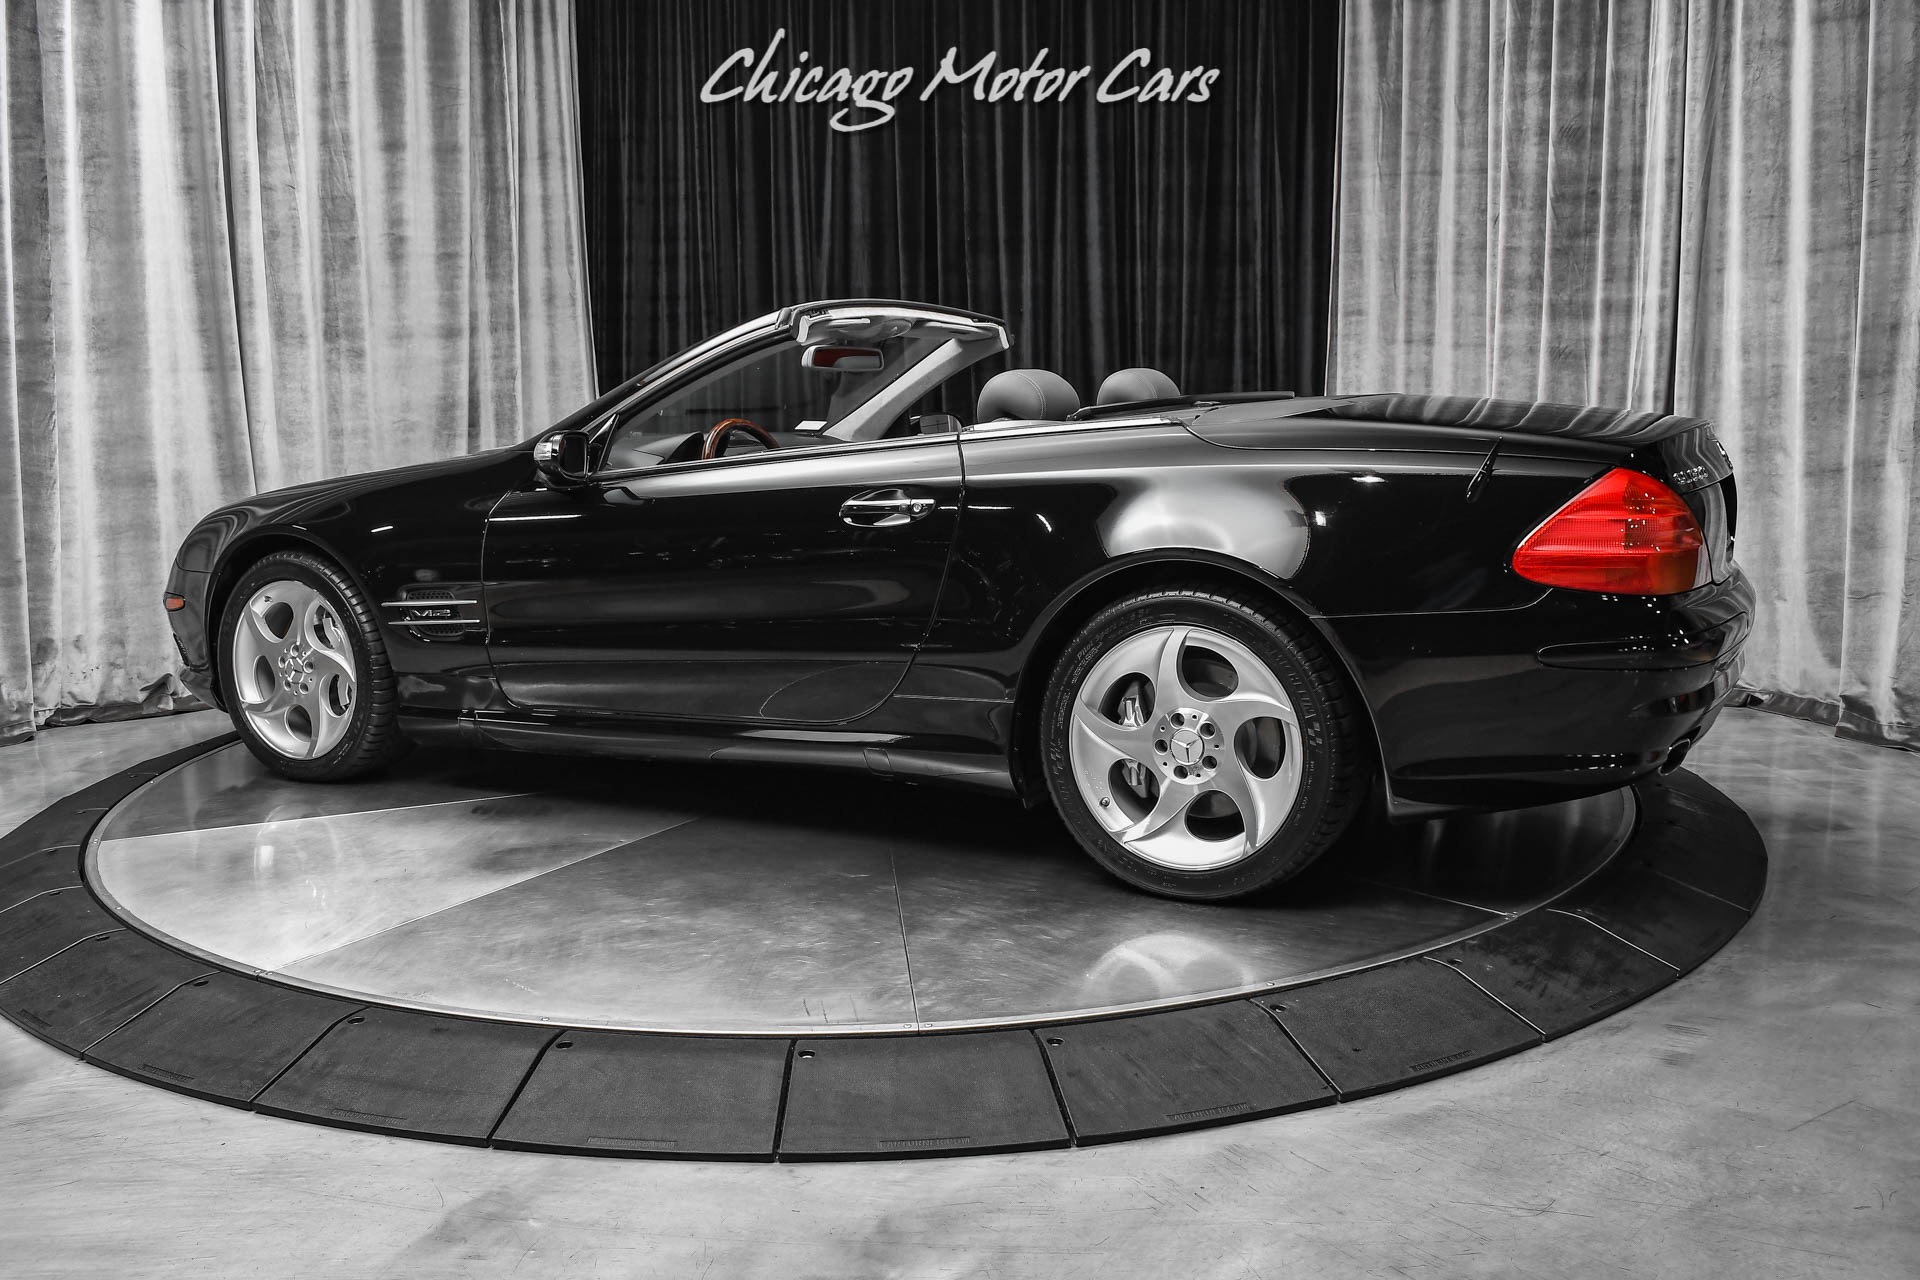 Used-2005-Mercedes-Benz-SL600-Roadster-Convertible-INCREDIBLE-Example-LOW-Miles-55L-V12